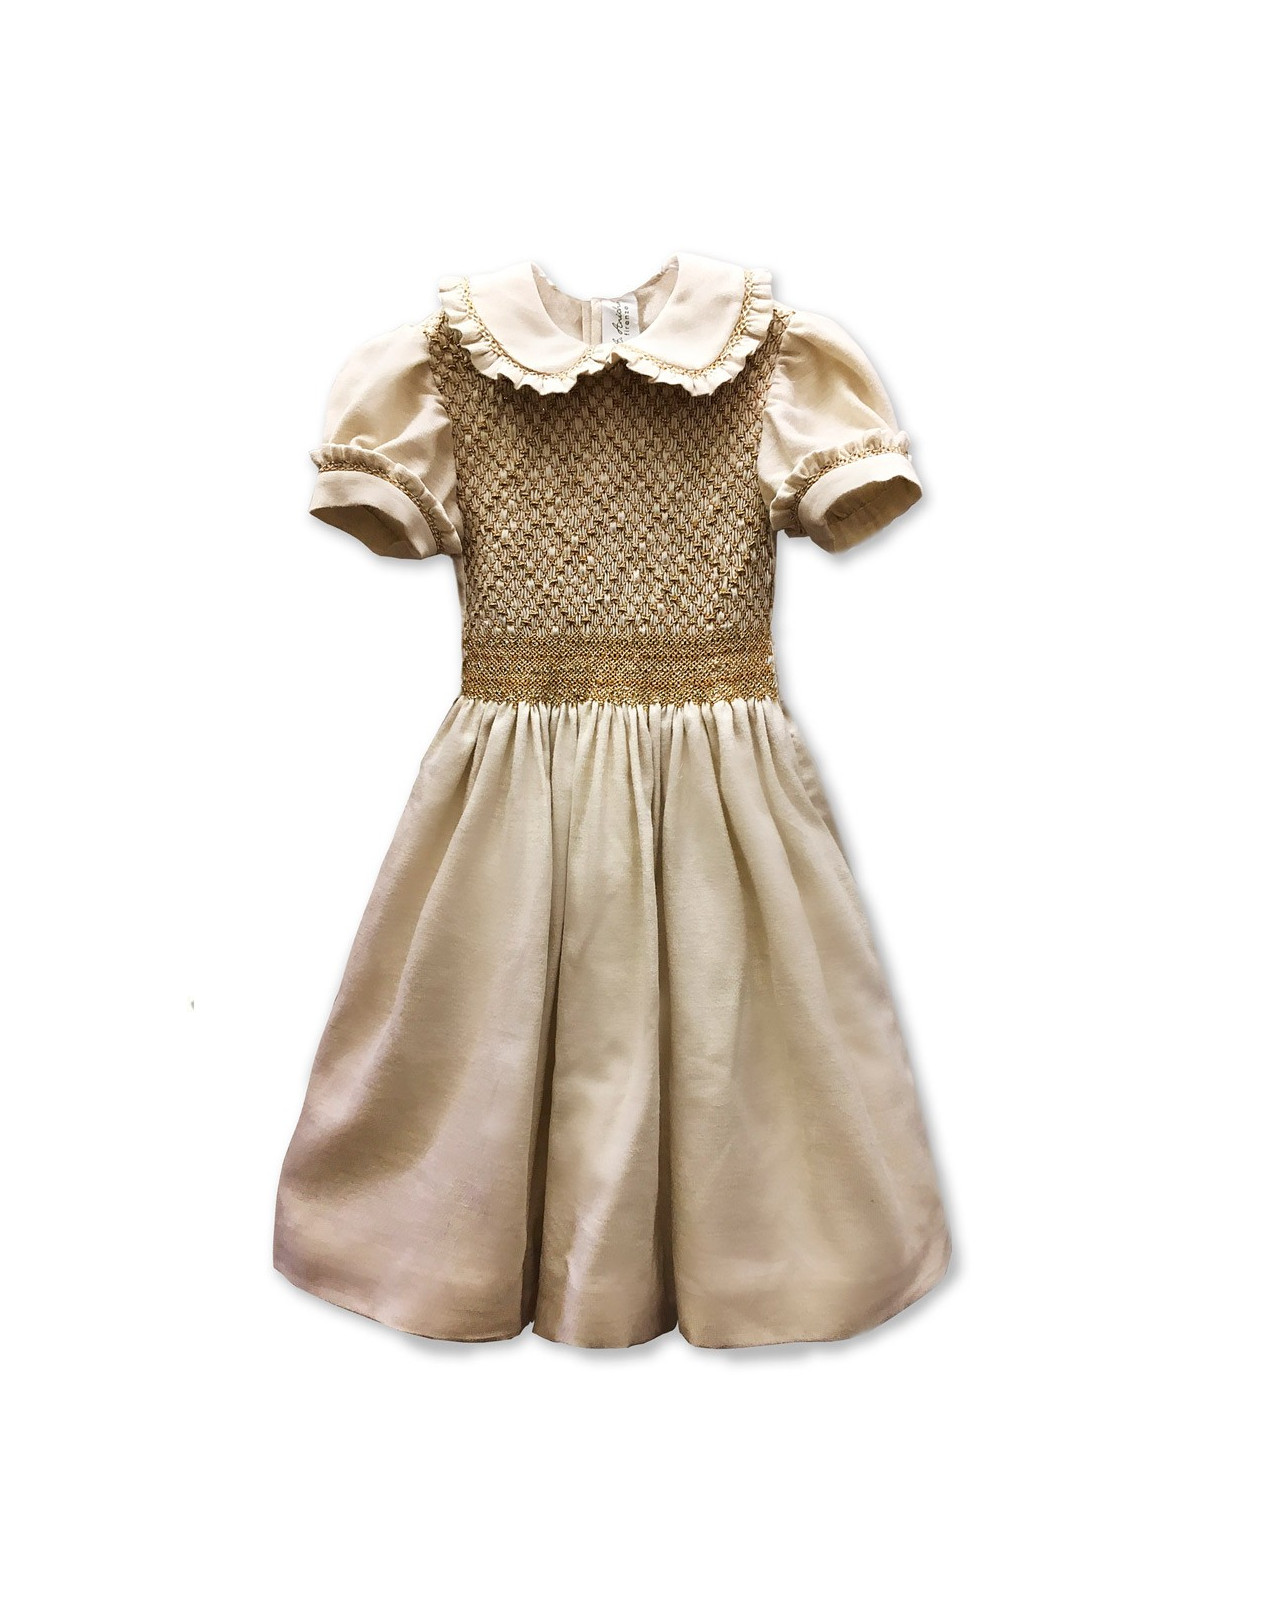 Peggy gold and silver smocked dress